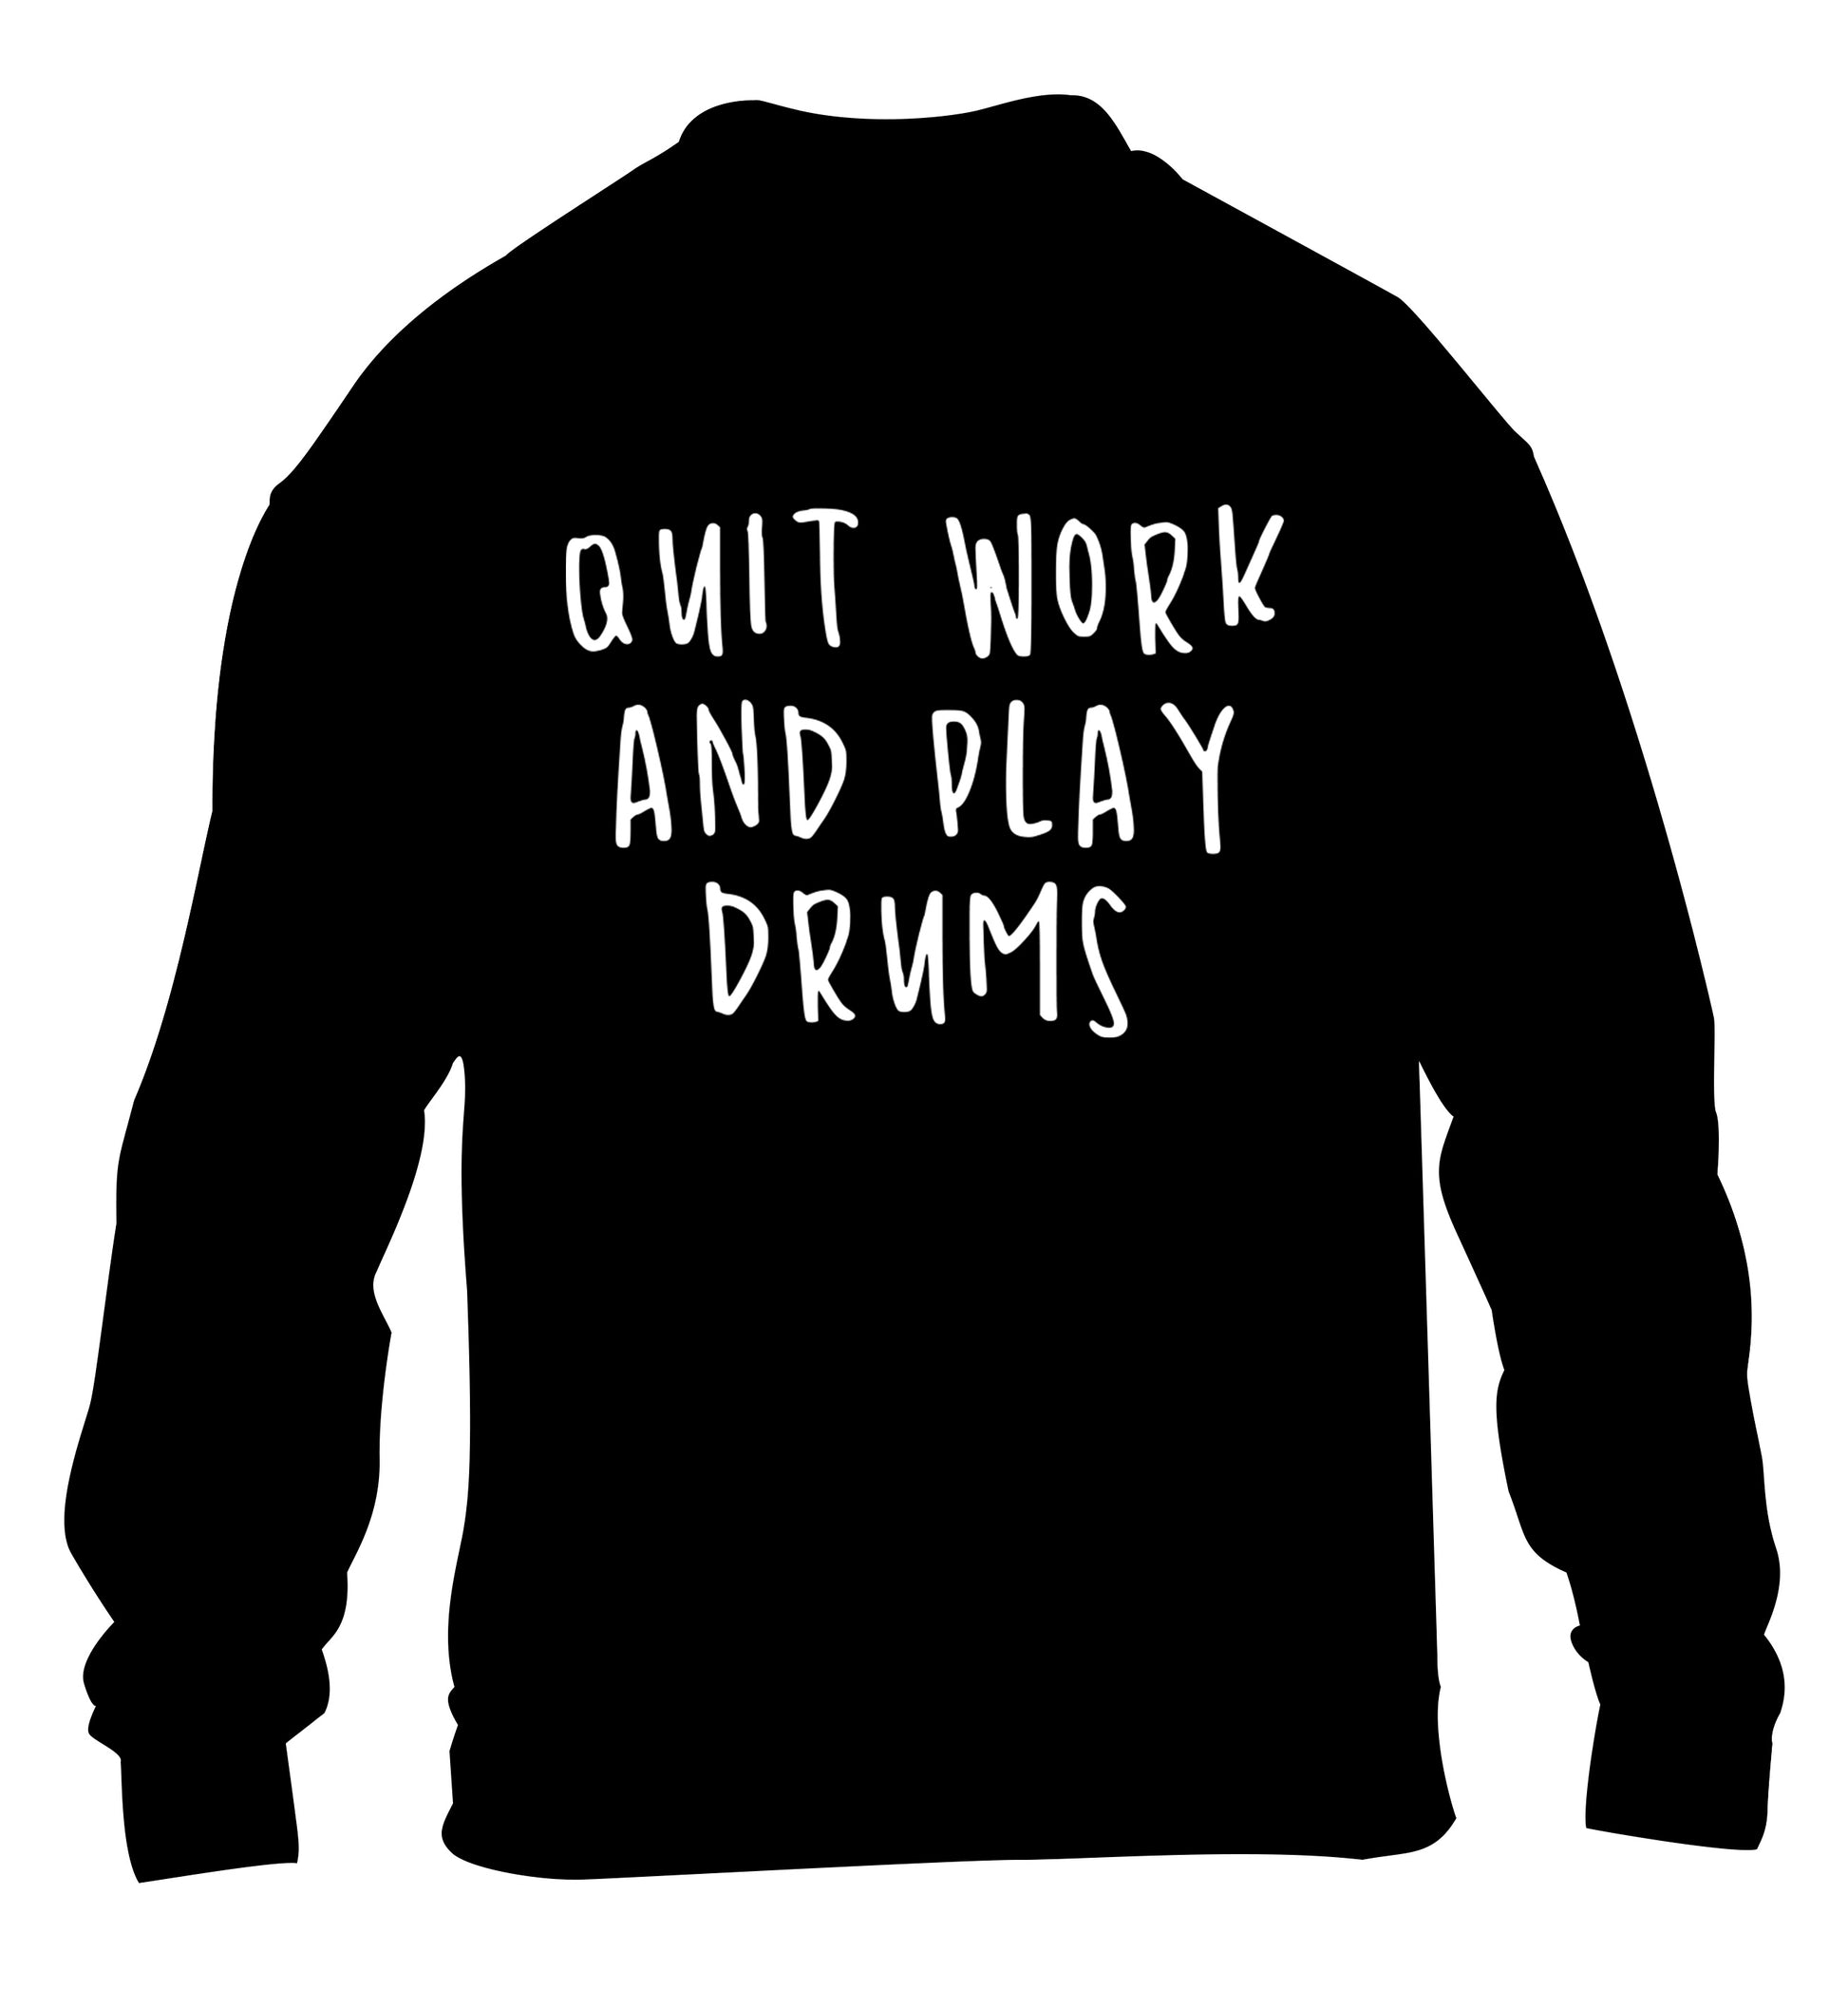 Quit work and play drums children's black sweater 12-14 Years